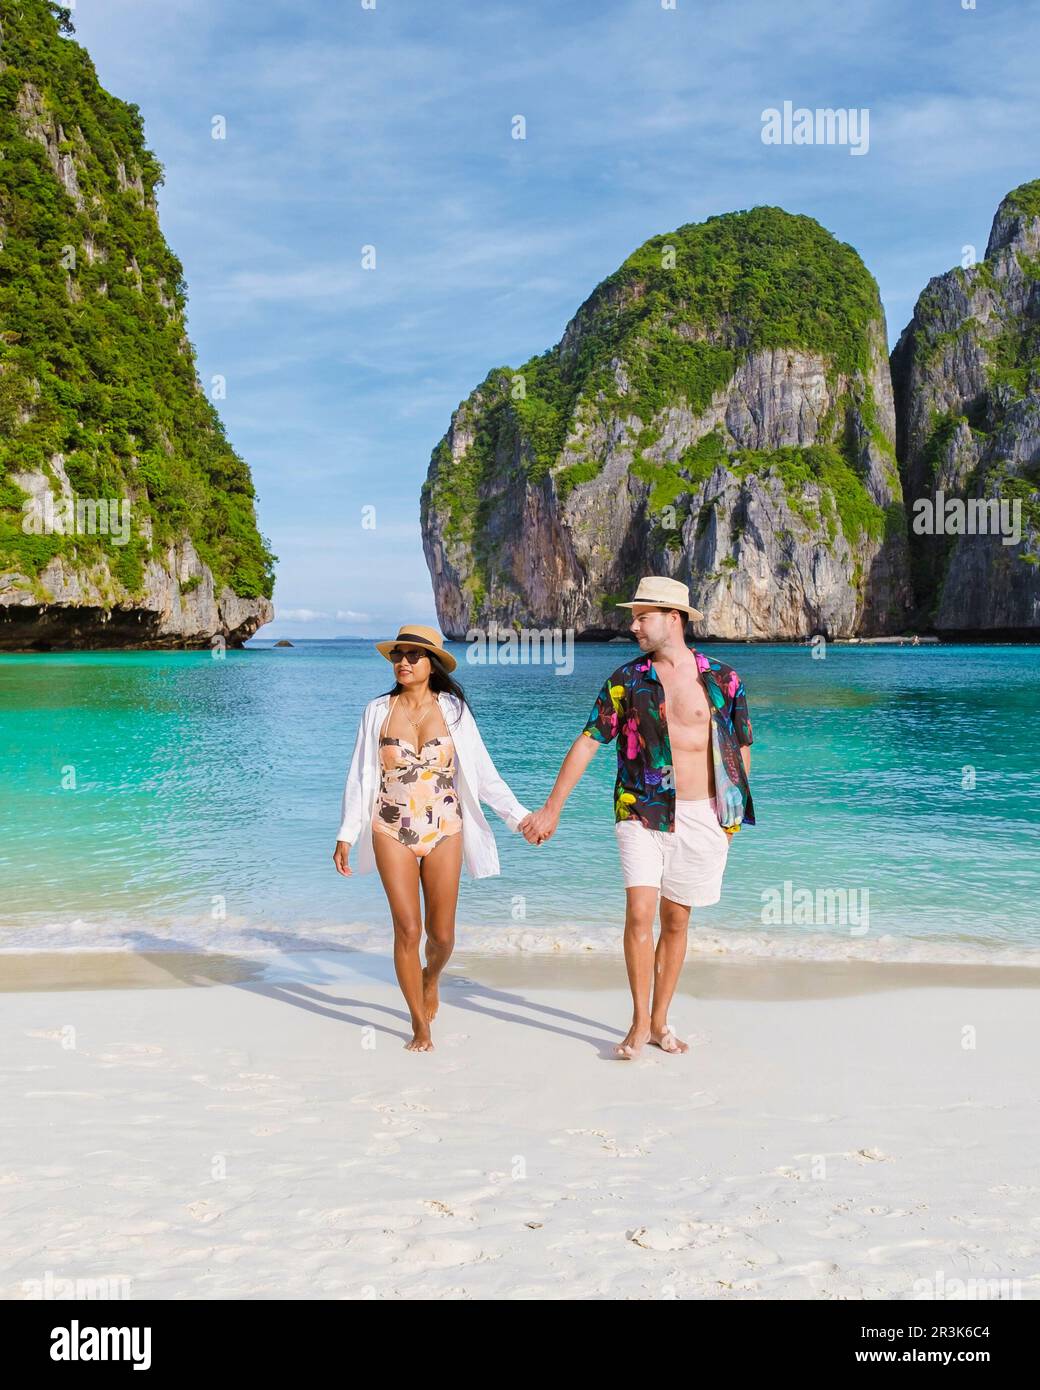 Maya Bay beach Koh Phi Phi Thailand in the morning with turqouse colored ocean Stock Photo